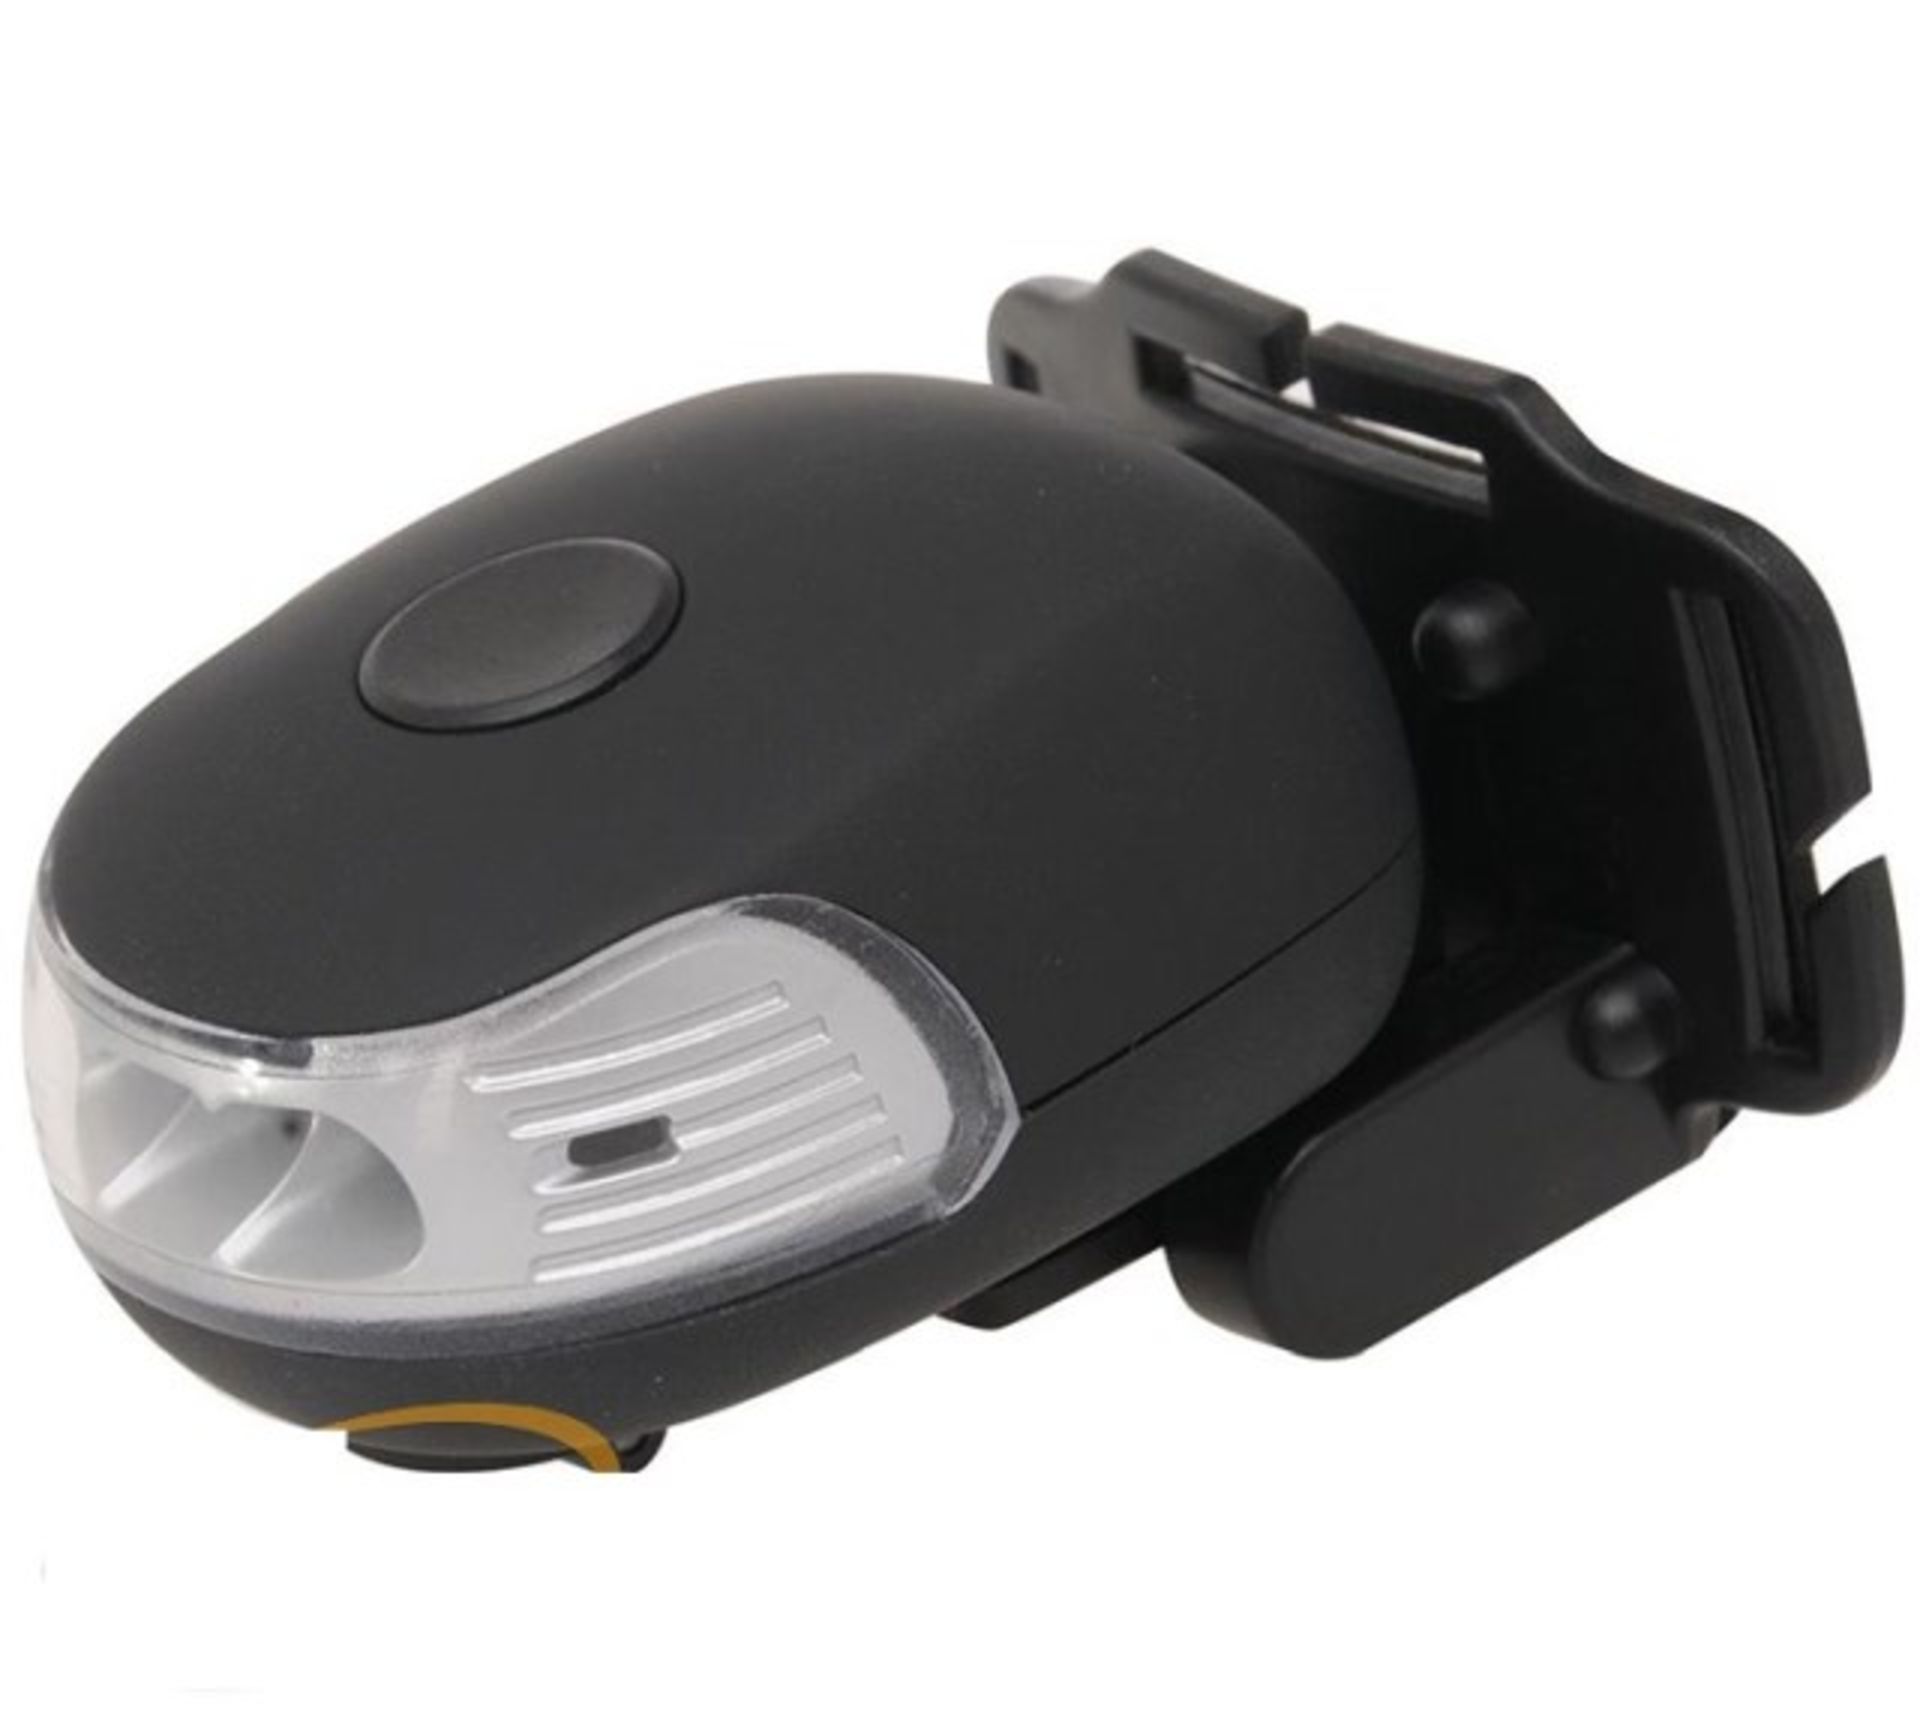 V *TRADE QTY* Brand New Tritronic Optrimax Wind-Up Head Lamp X 3 YOUR BID PRICE TO BE MULTIPLIED